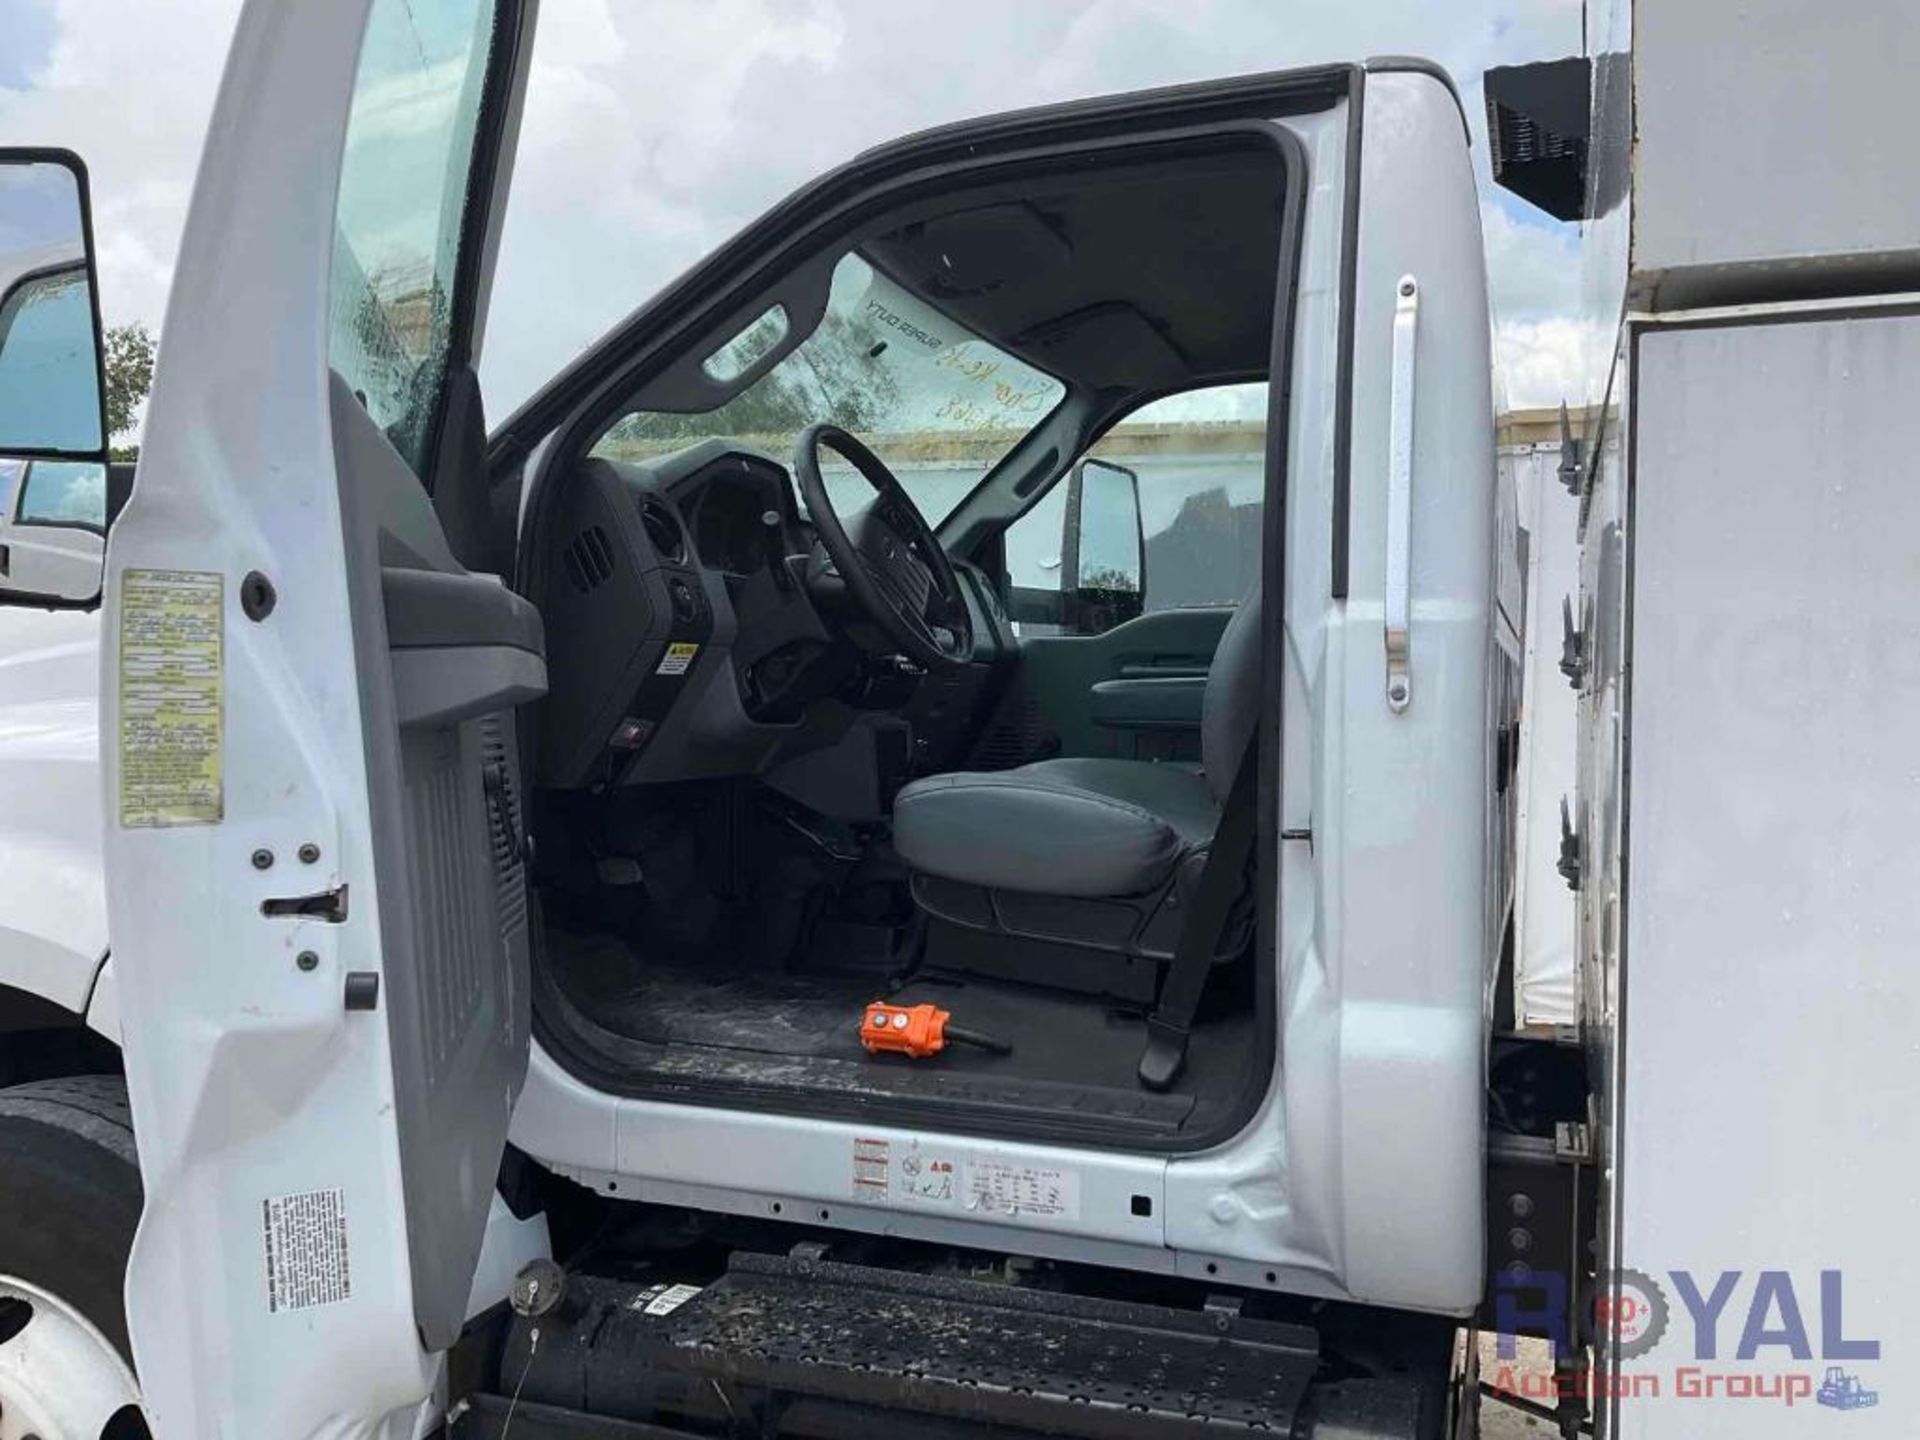 2019 Ford F-750 Forestry Chipper Dump Truck - Image 11 of 53